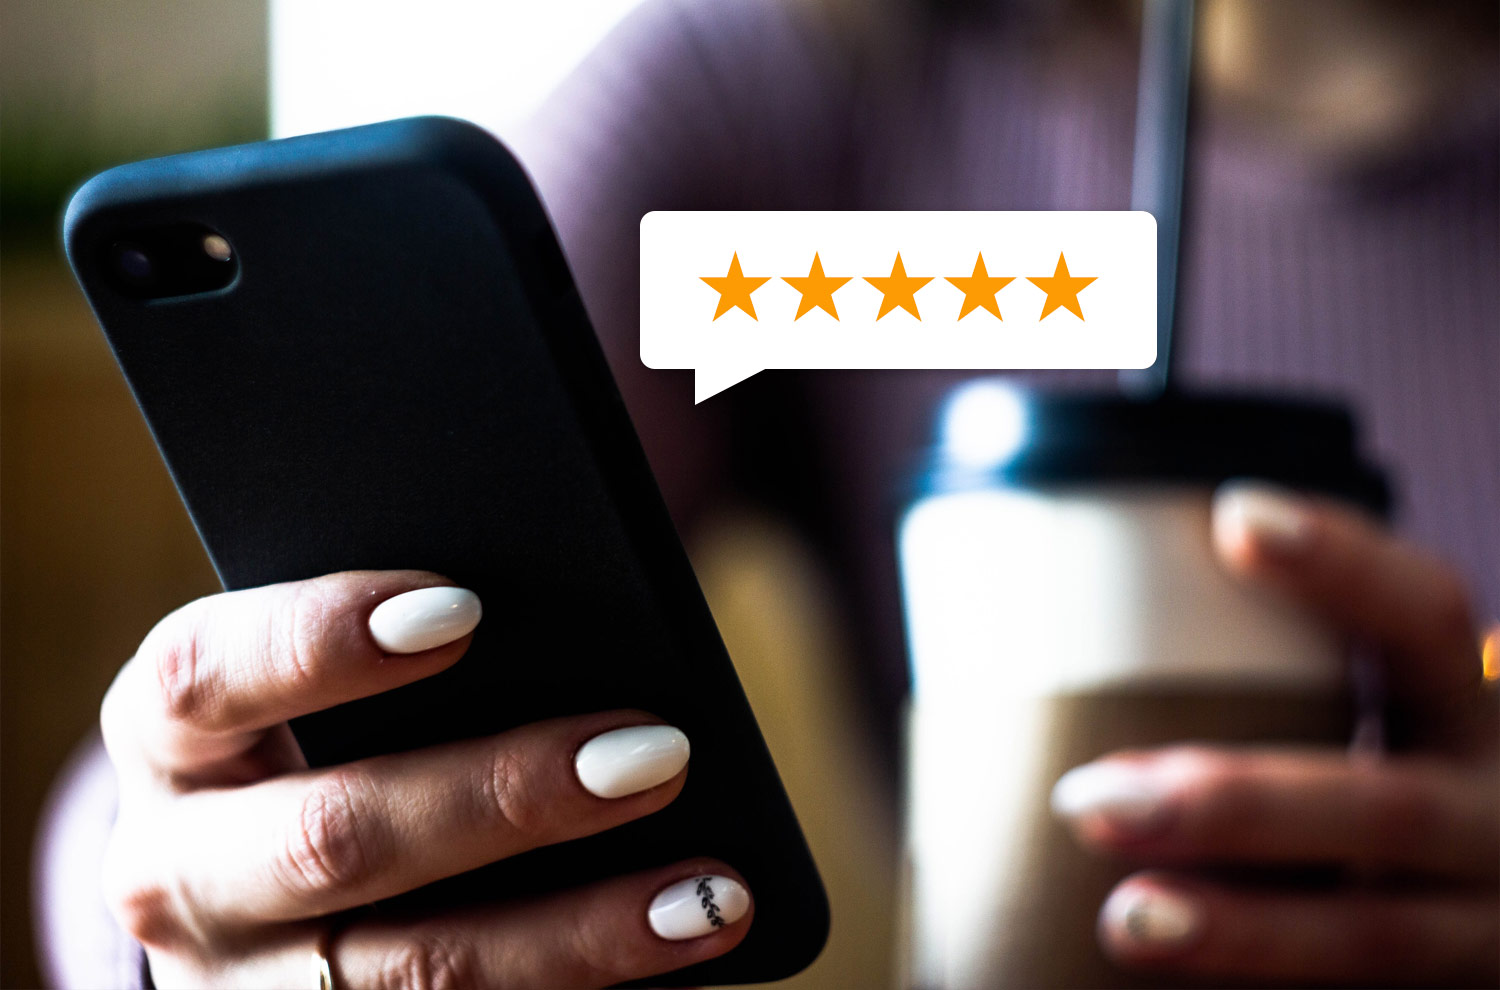 Mobile phone with 5 star review